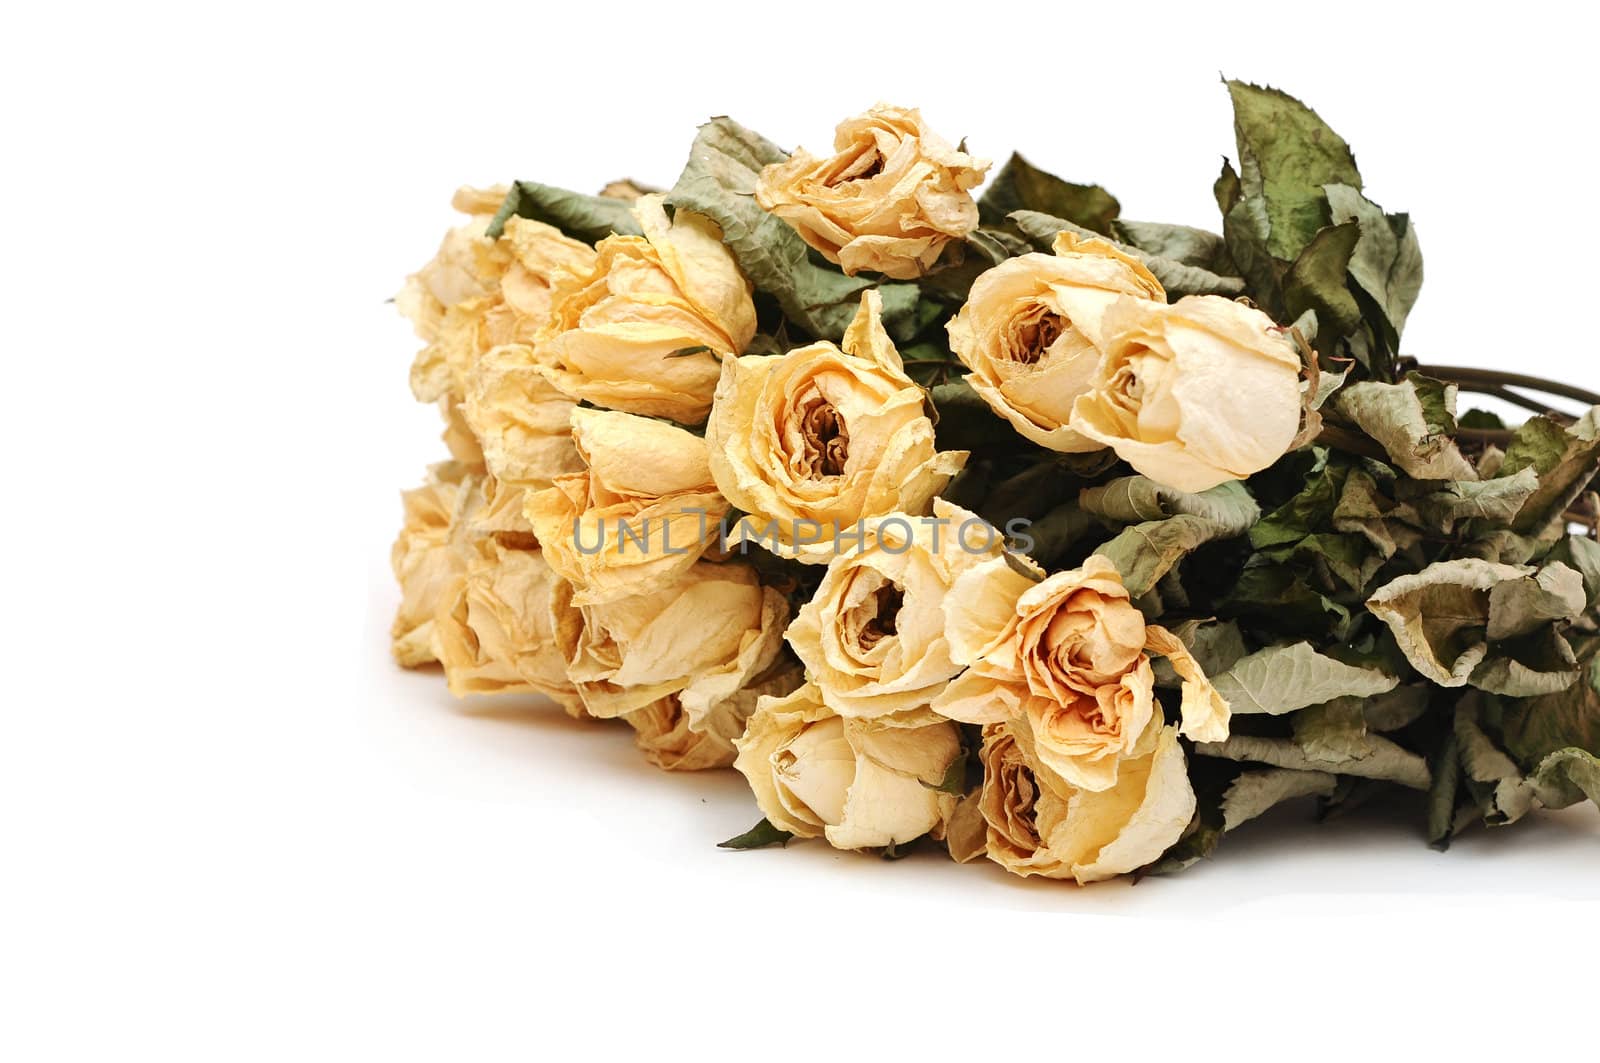 dry roses on a white background by inxti